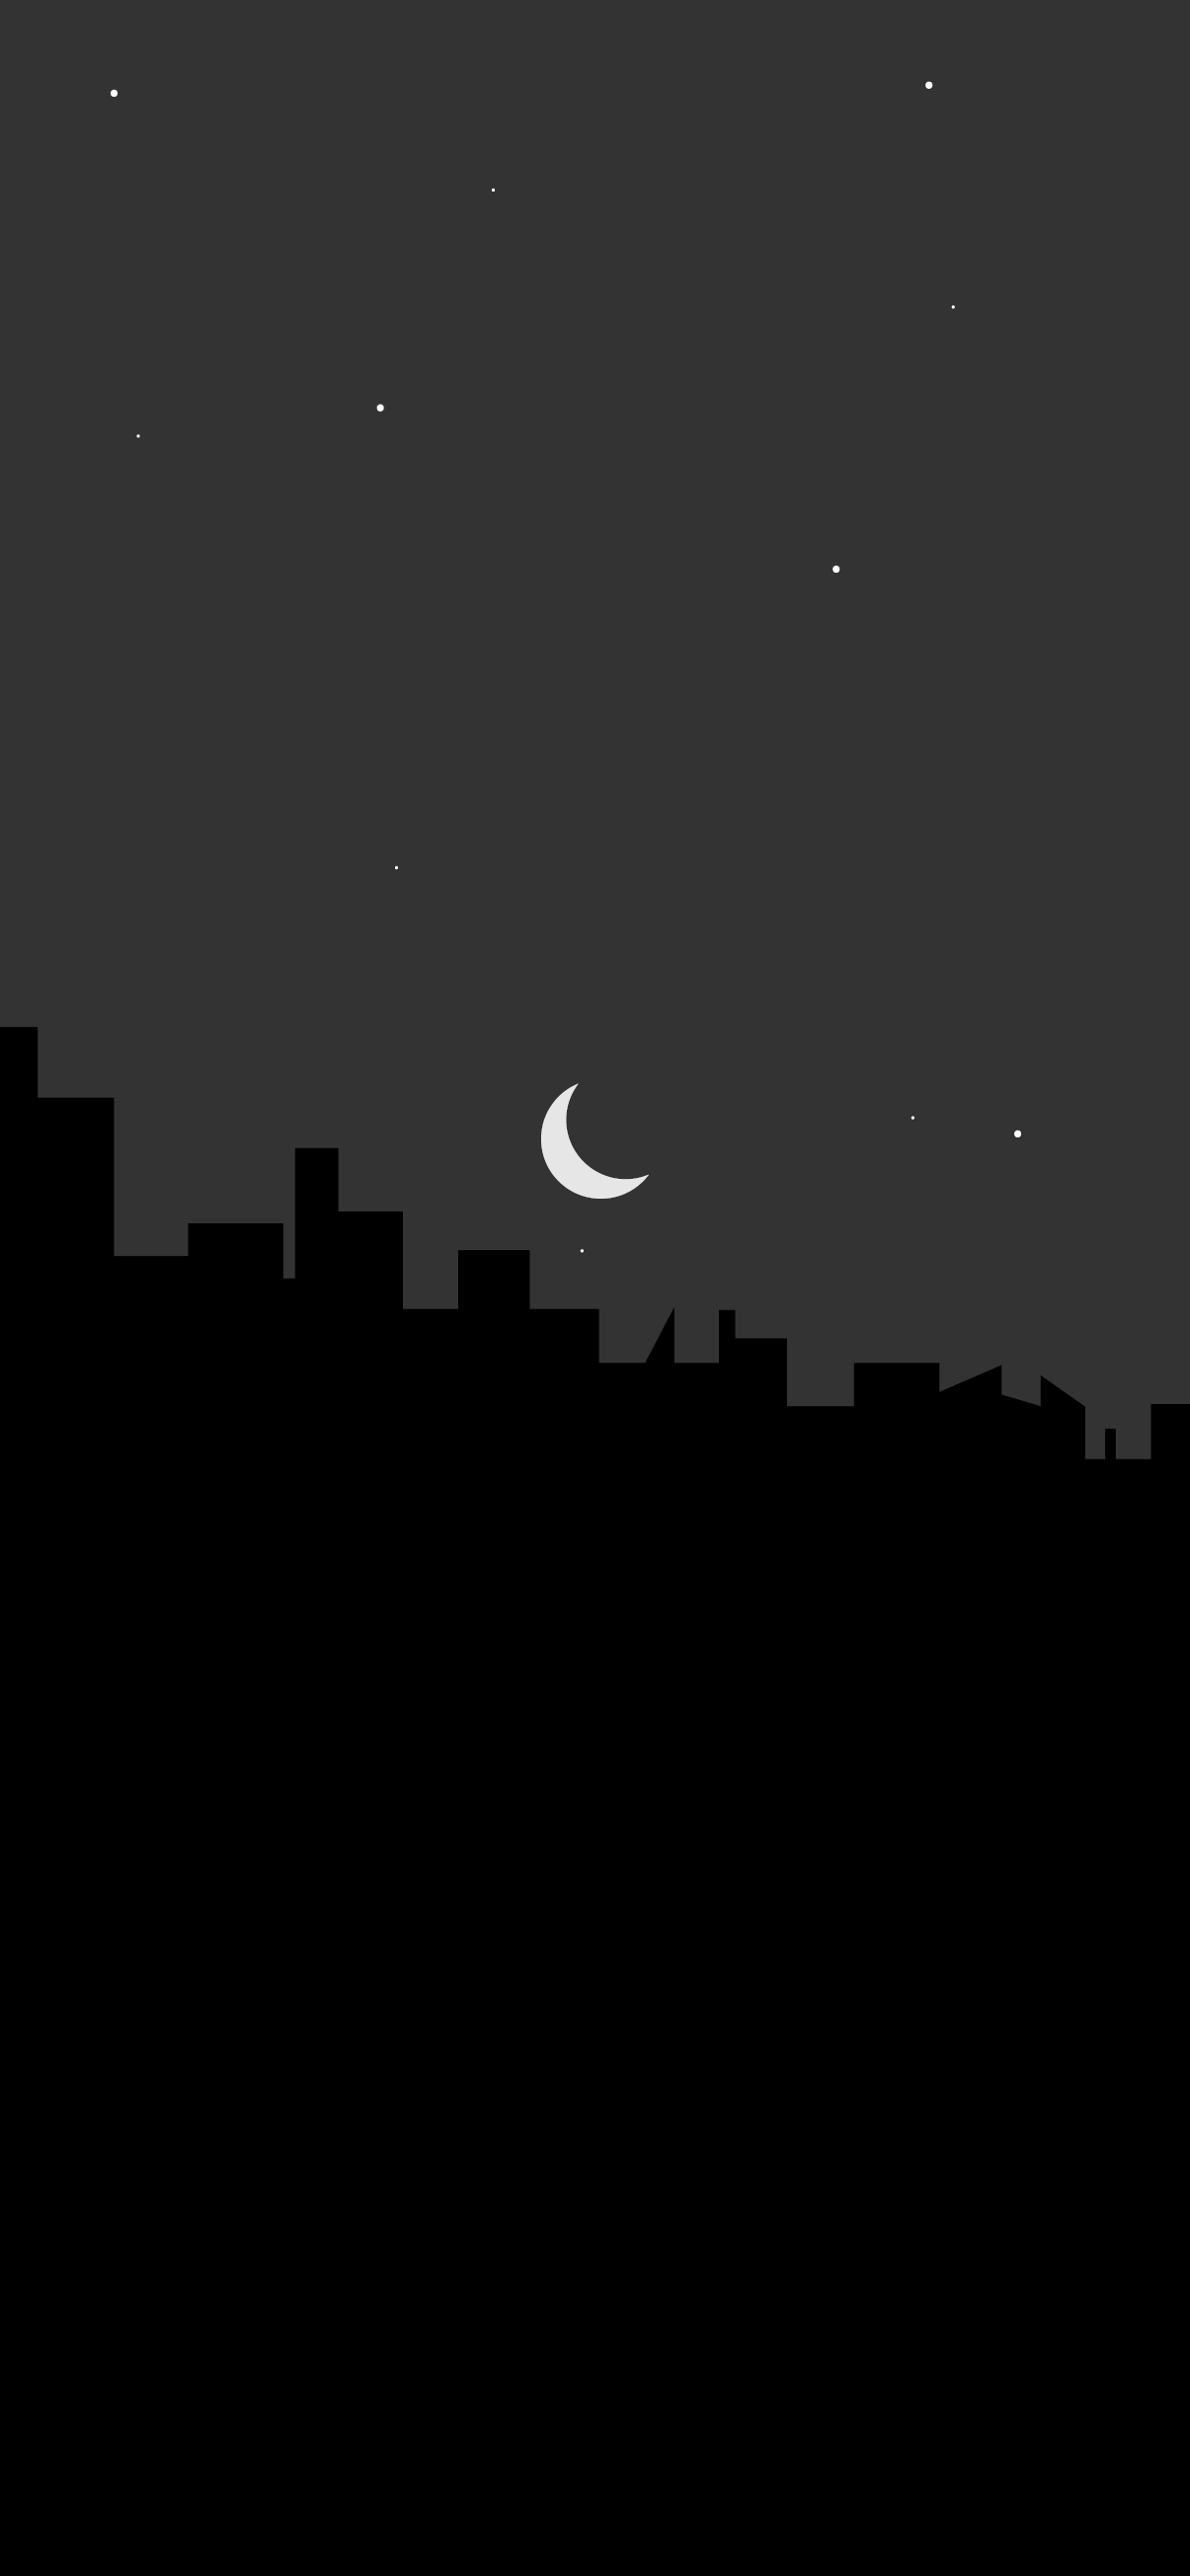 Wallpaper iphone city silhouette black and grey